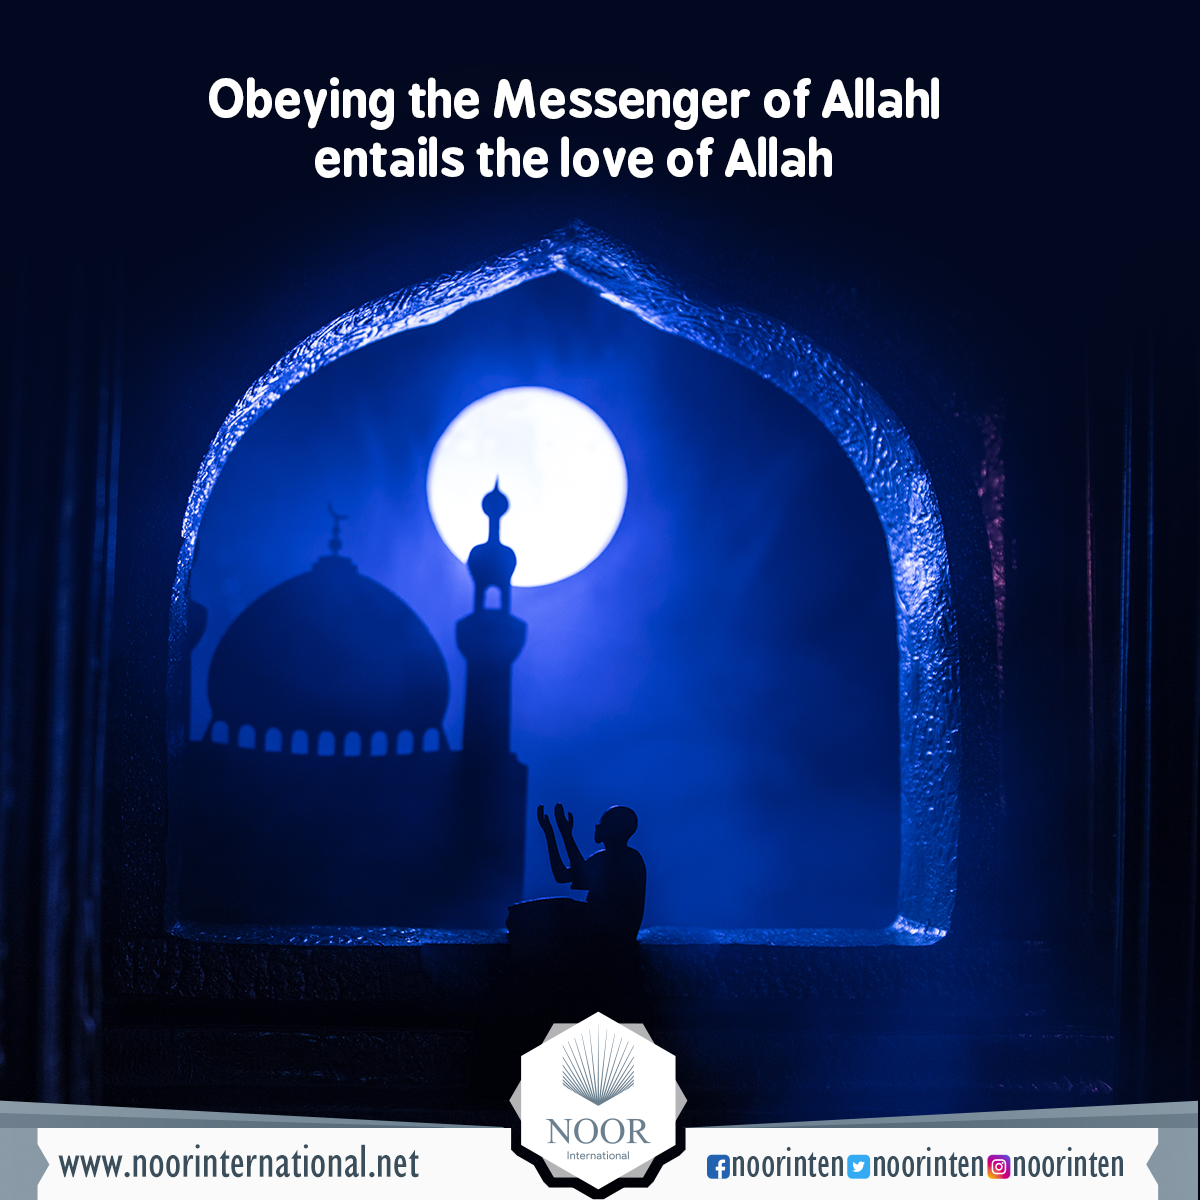 Obeying the Messenger of Allah entails the love of Allah